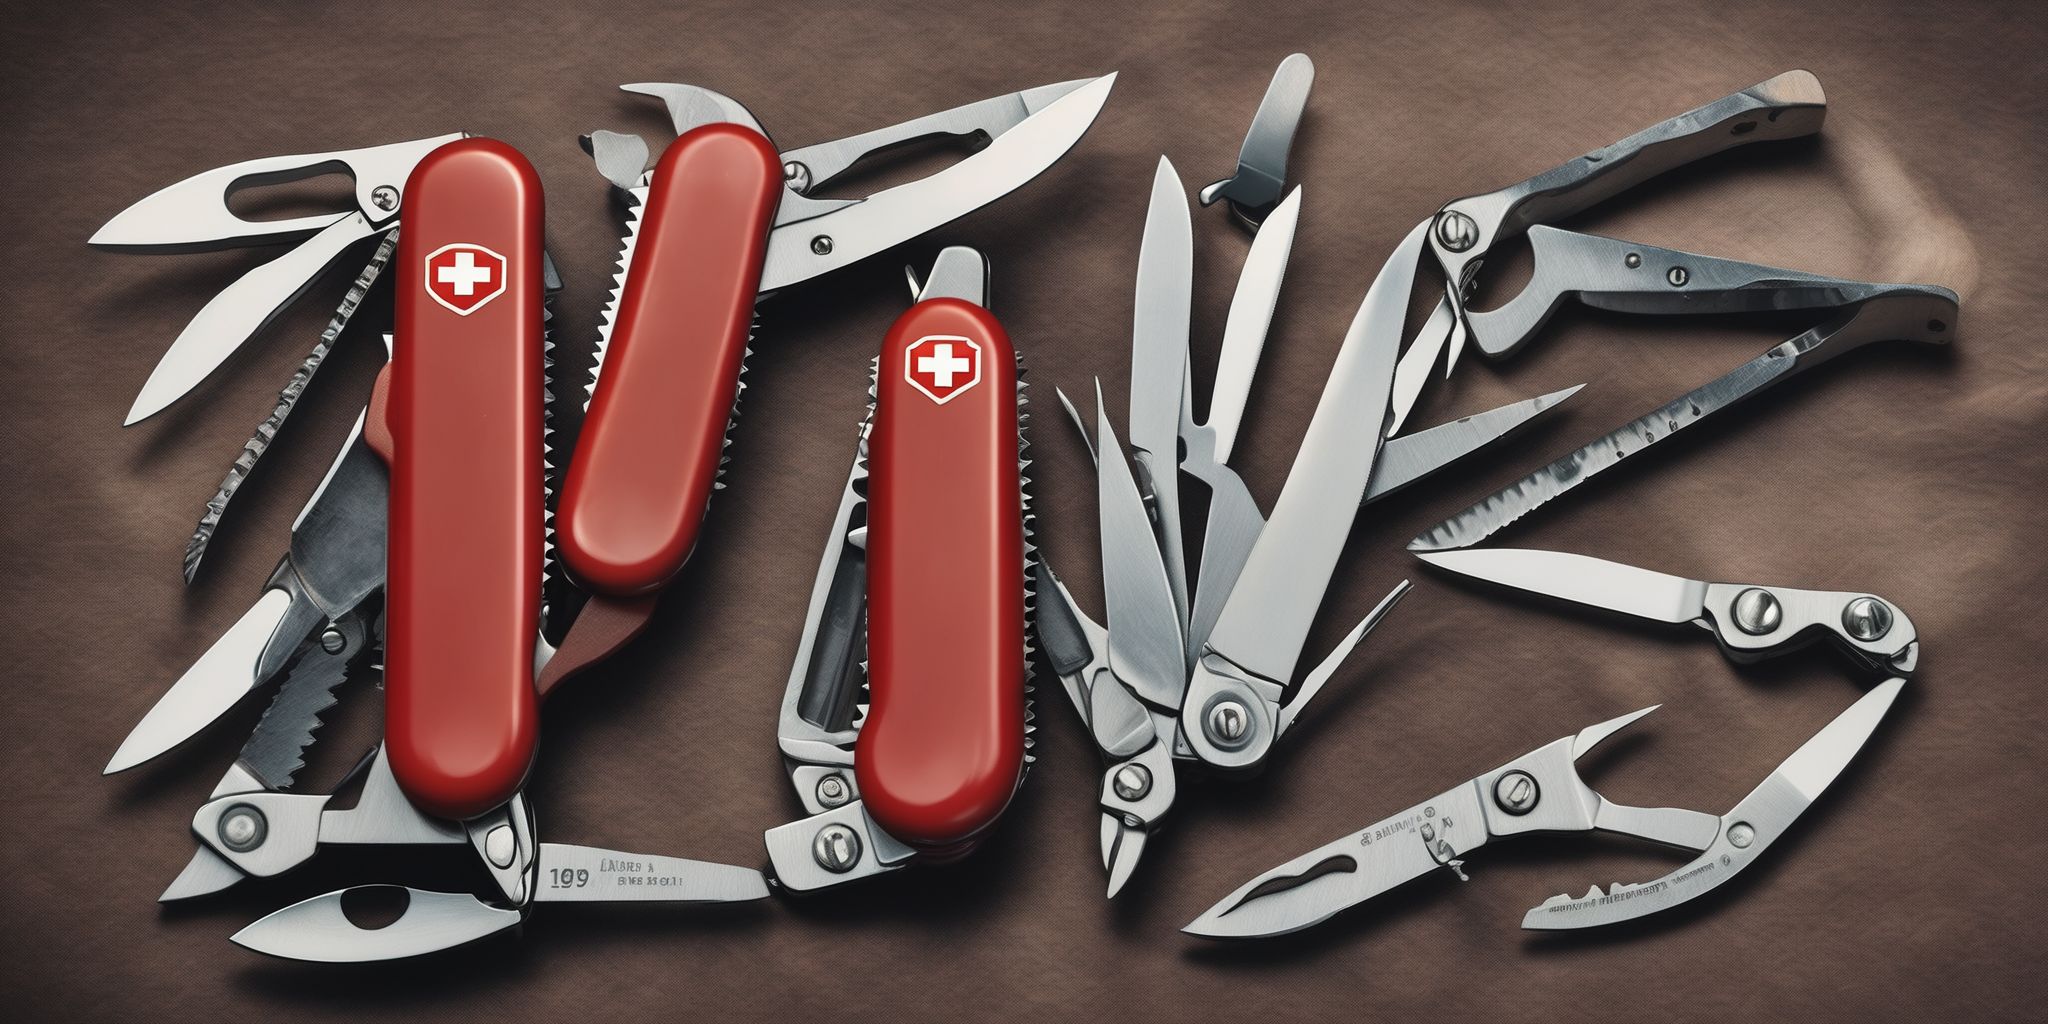 Swiss army knife  in realistic, photographic style